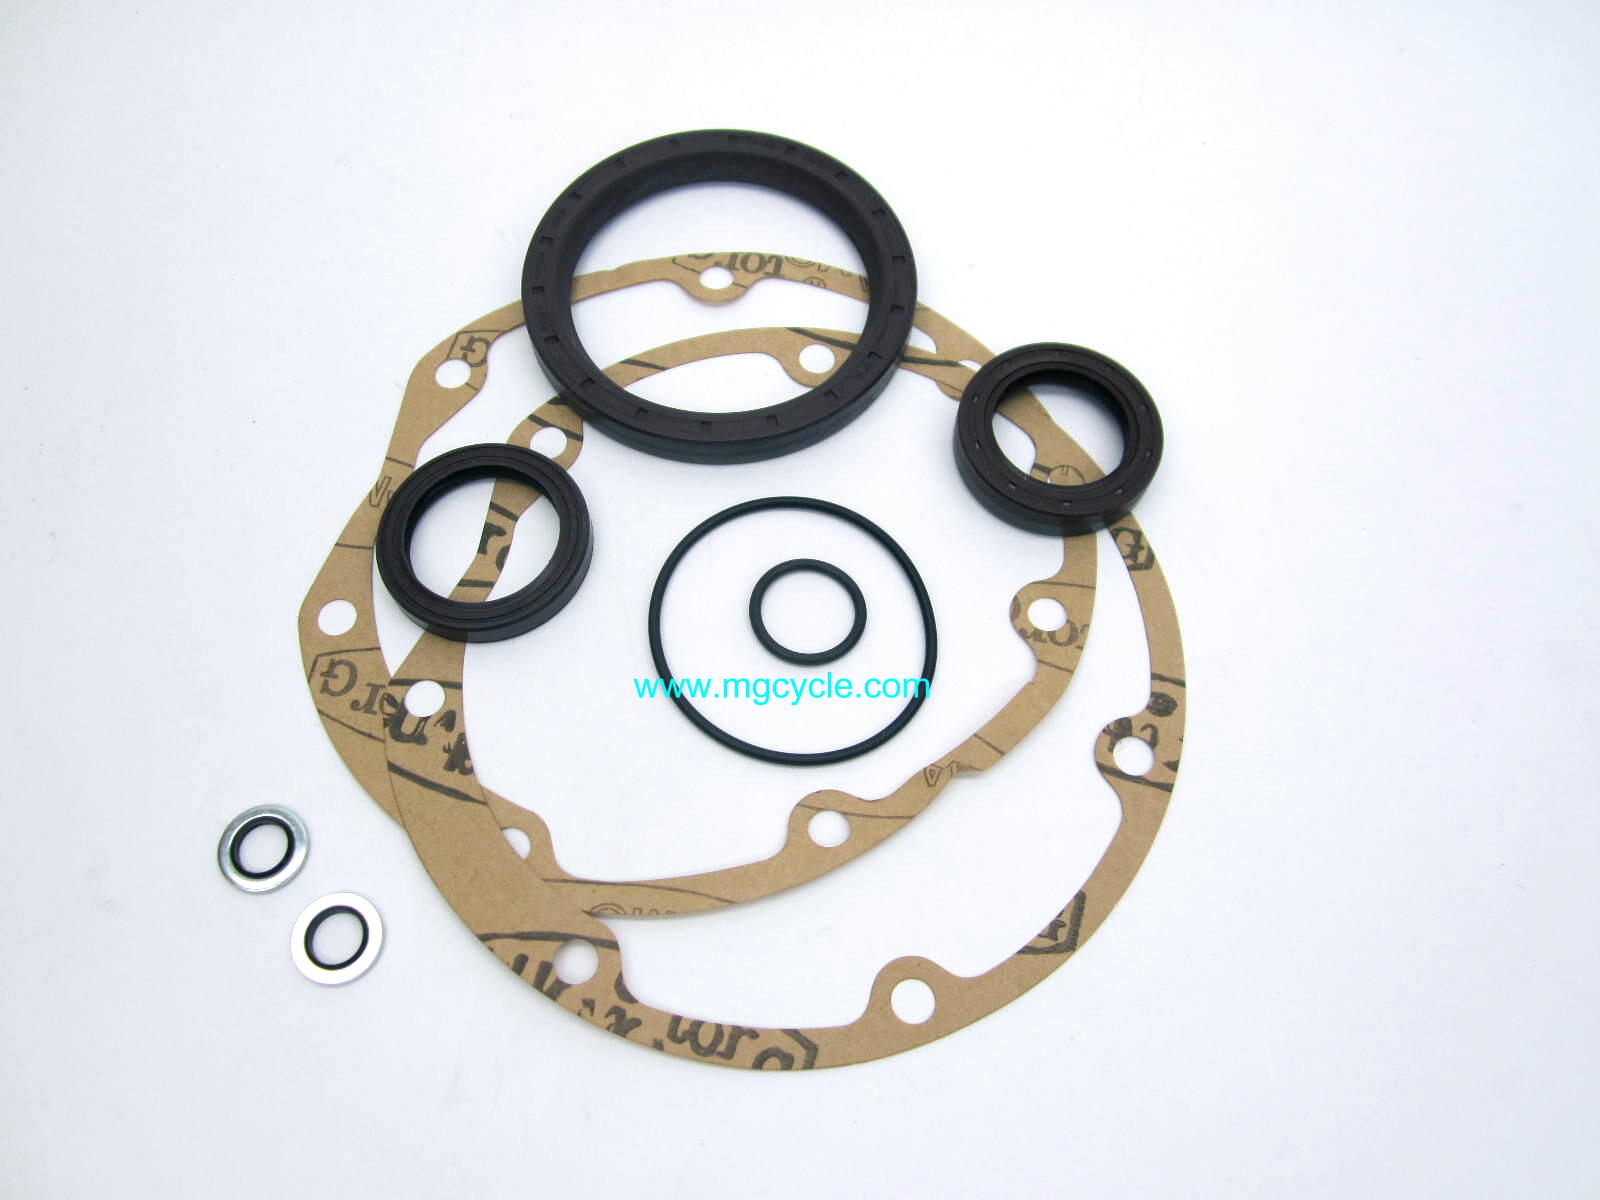 Final drive sealing kit for small twins V7 series 750cc - Click Image to Close